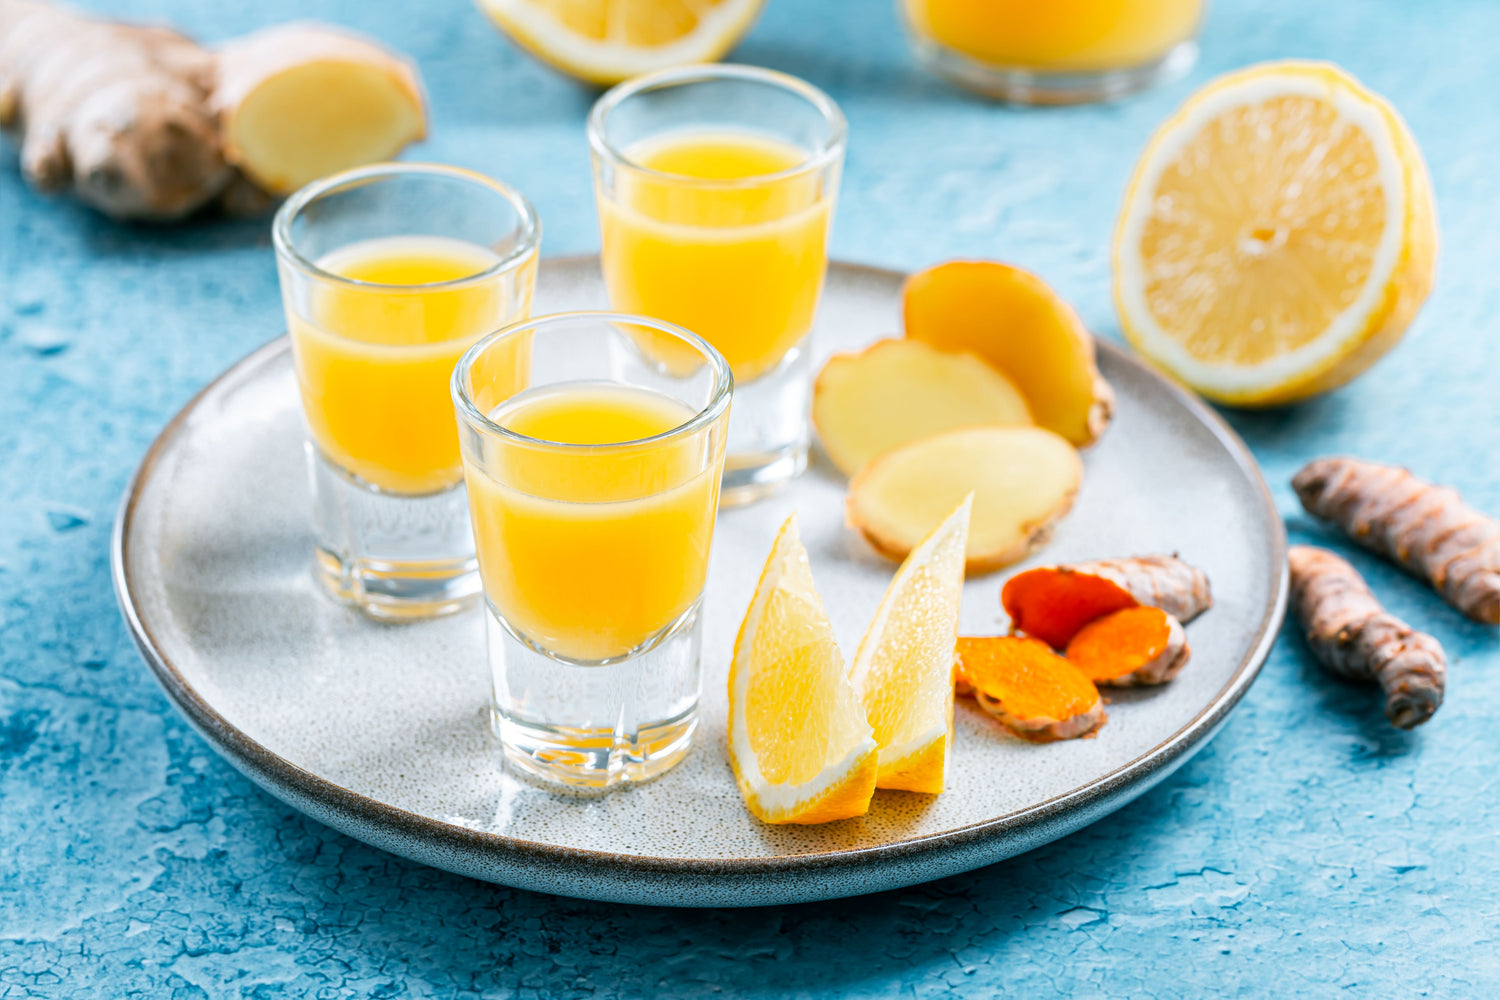 Kick Cold and Flu Season with this Quick and Easy Immunity Shot